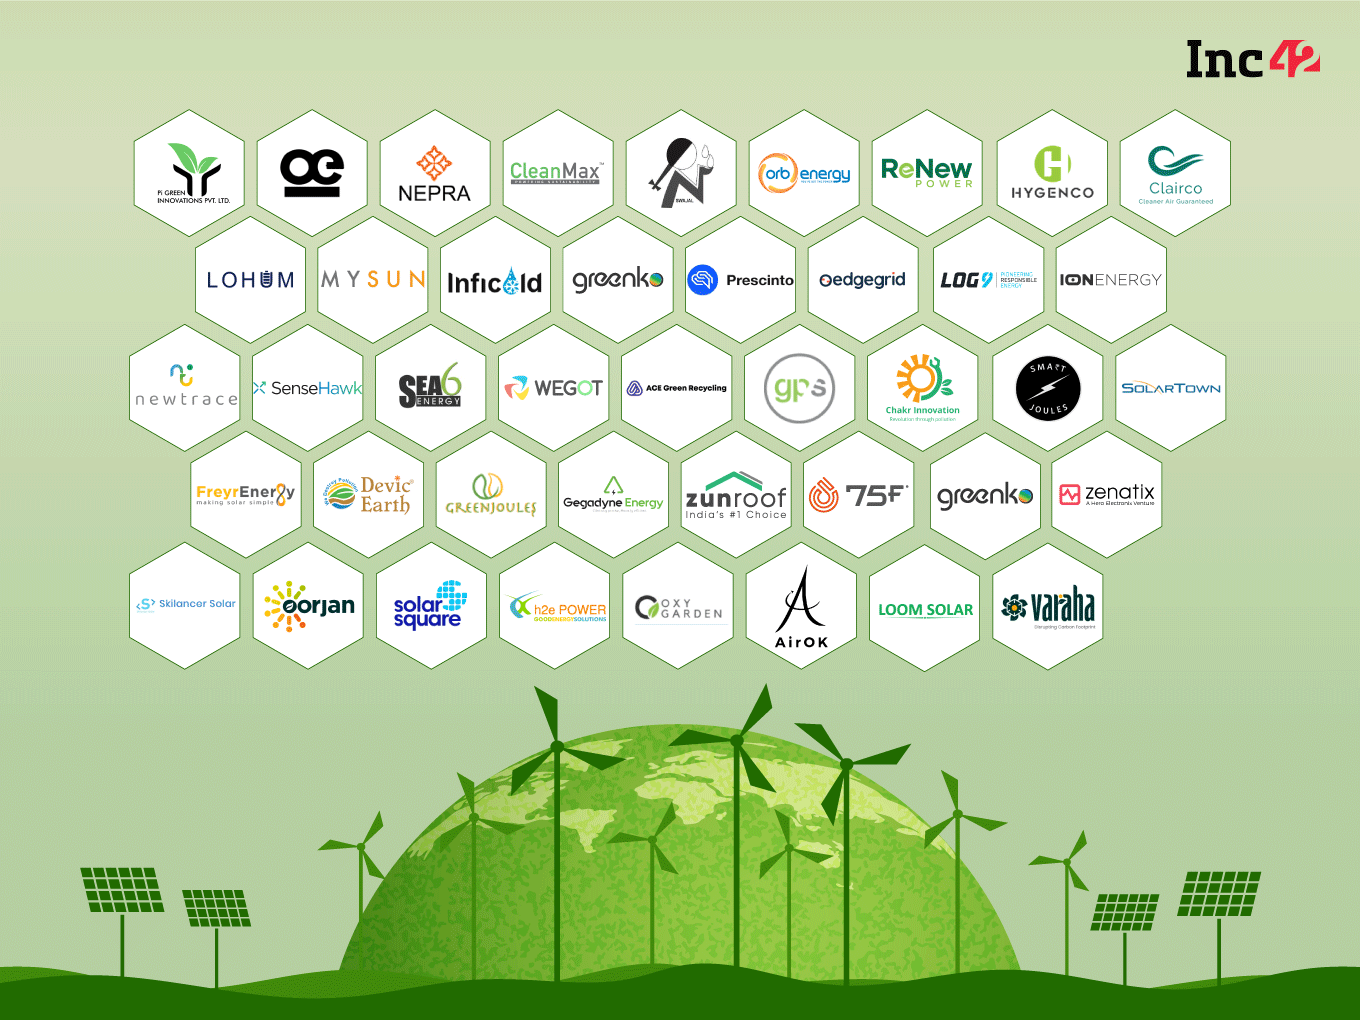 Inc42 has compiled a list of 45 cleantech startups, which have come up with unique solutions to contribute to India’s clean energy goal.